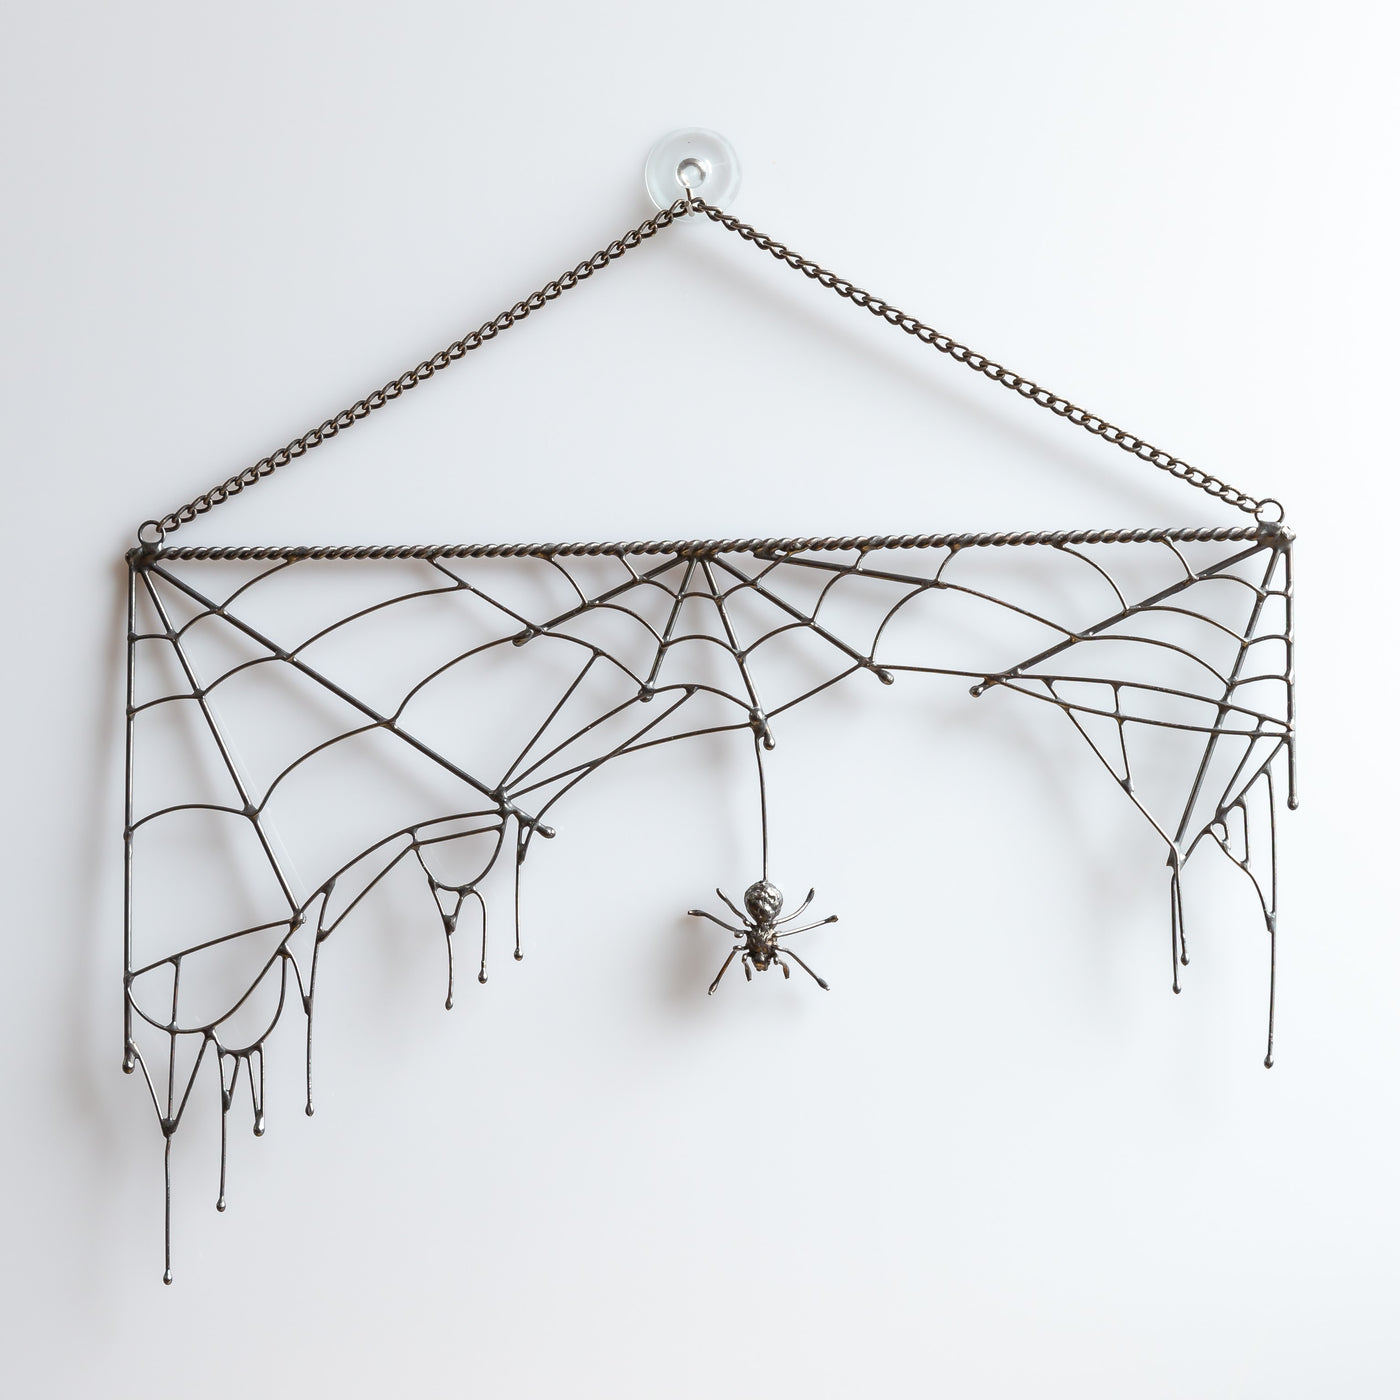 Copper wire Rectangular spider web with a spider in the middle Halloween spooky decor